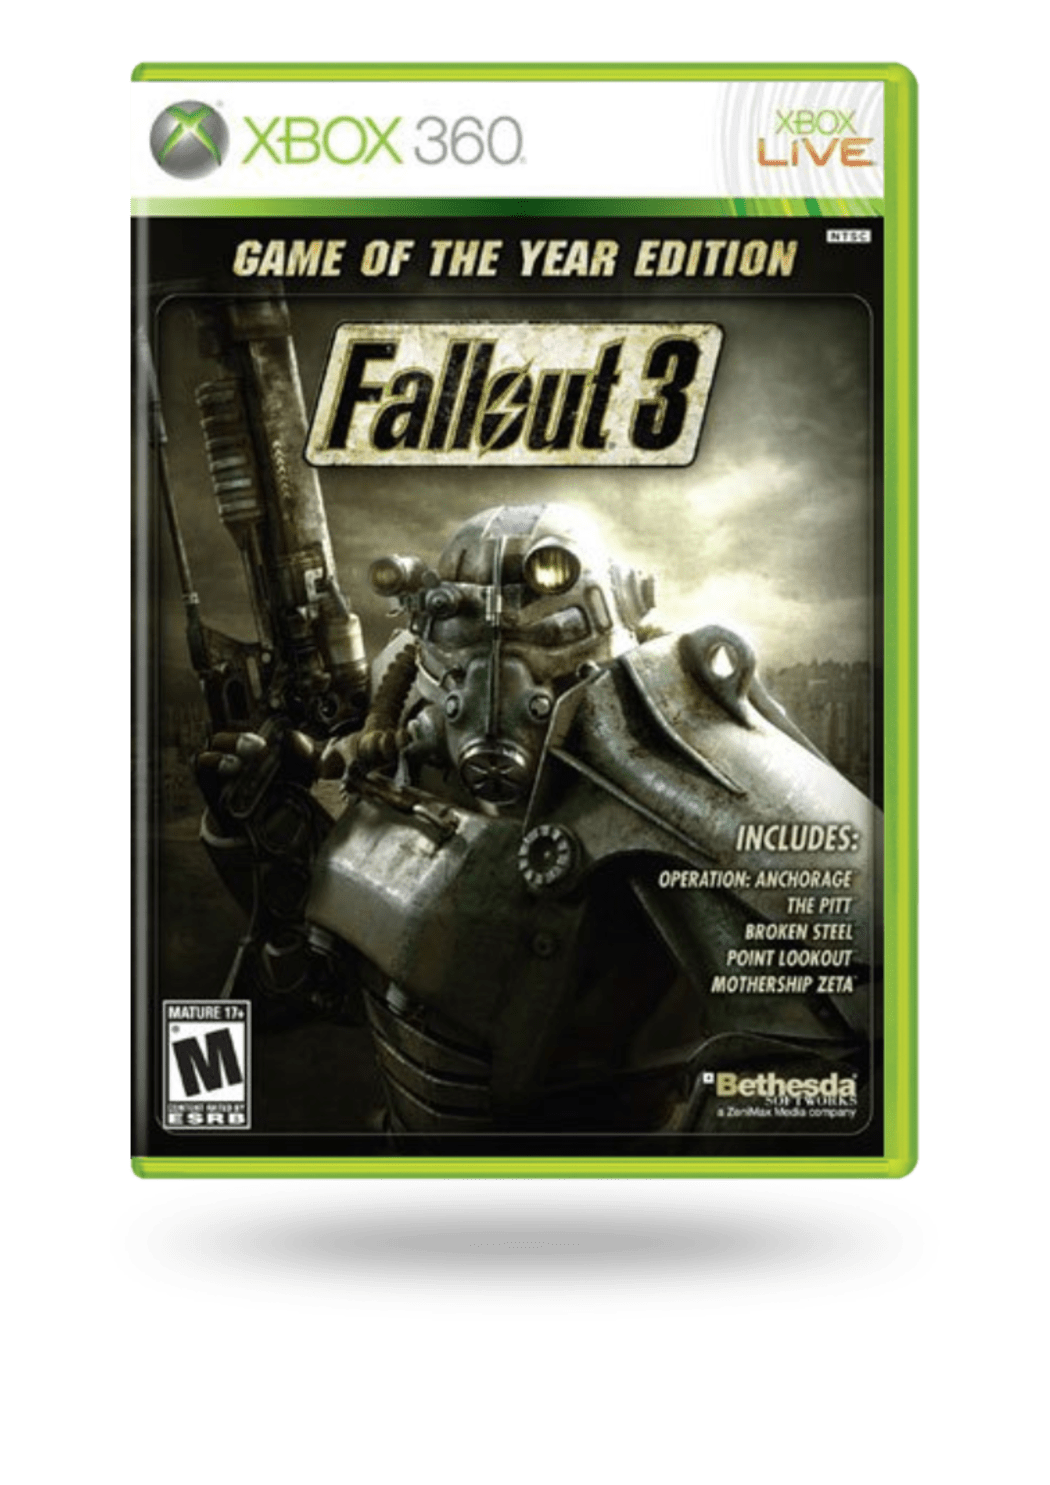 angst-ung-nstig-muskul-s-xbox-fallout-3-game-of-the-year-edition-palme-bitte-fu-polster